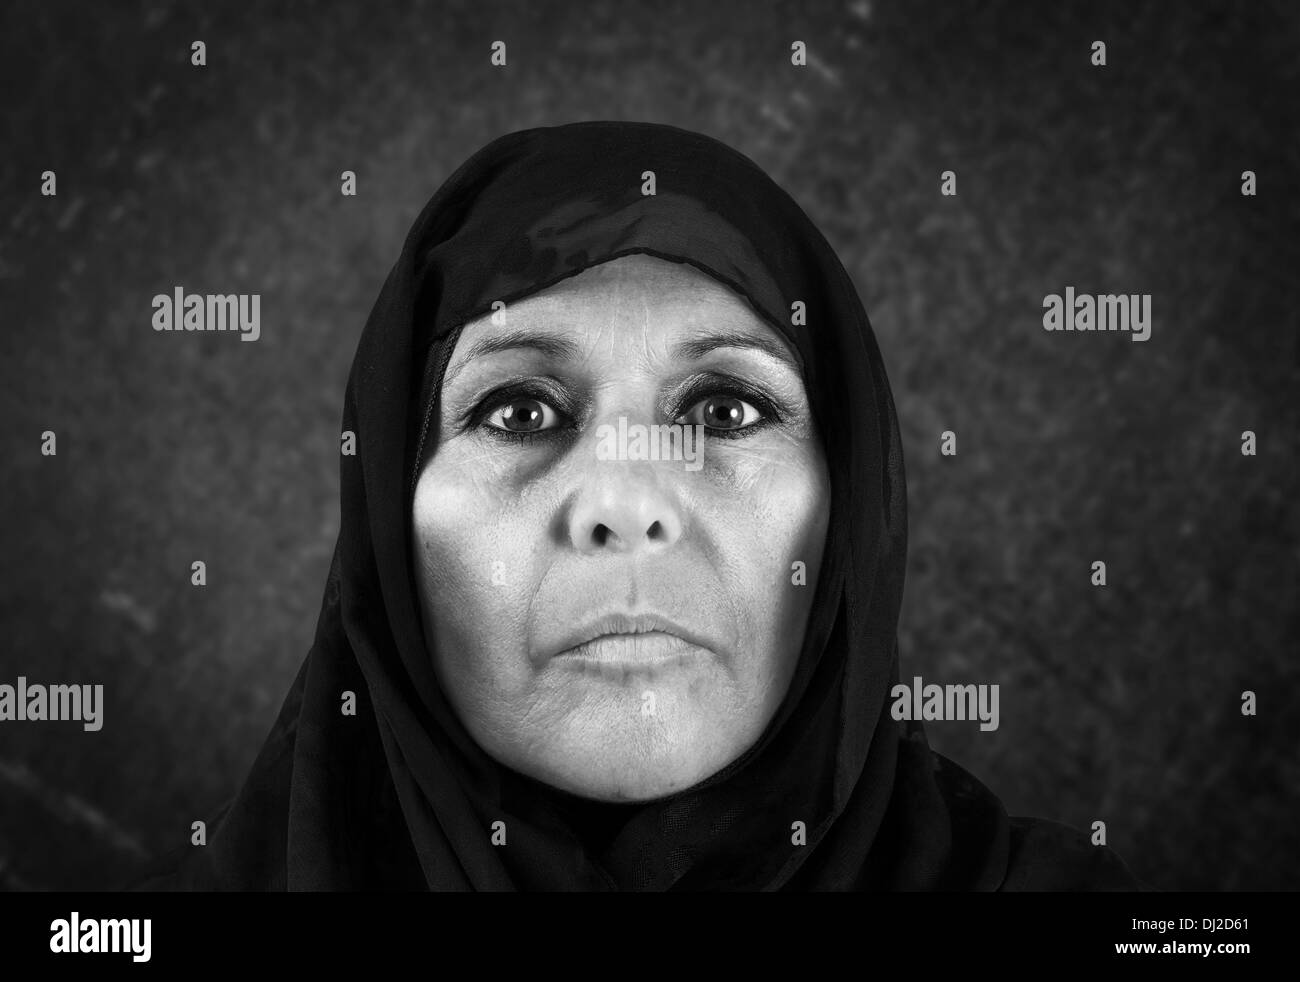 Dramatic blackand white portrait of serious middle aged muslim woman with black scarf or hijab Stock Photo